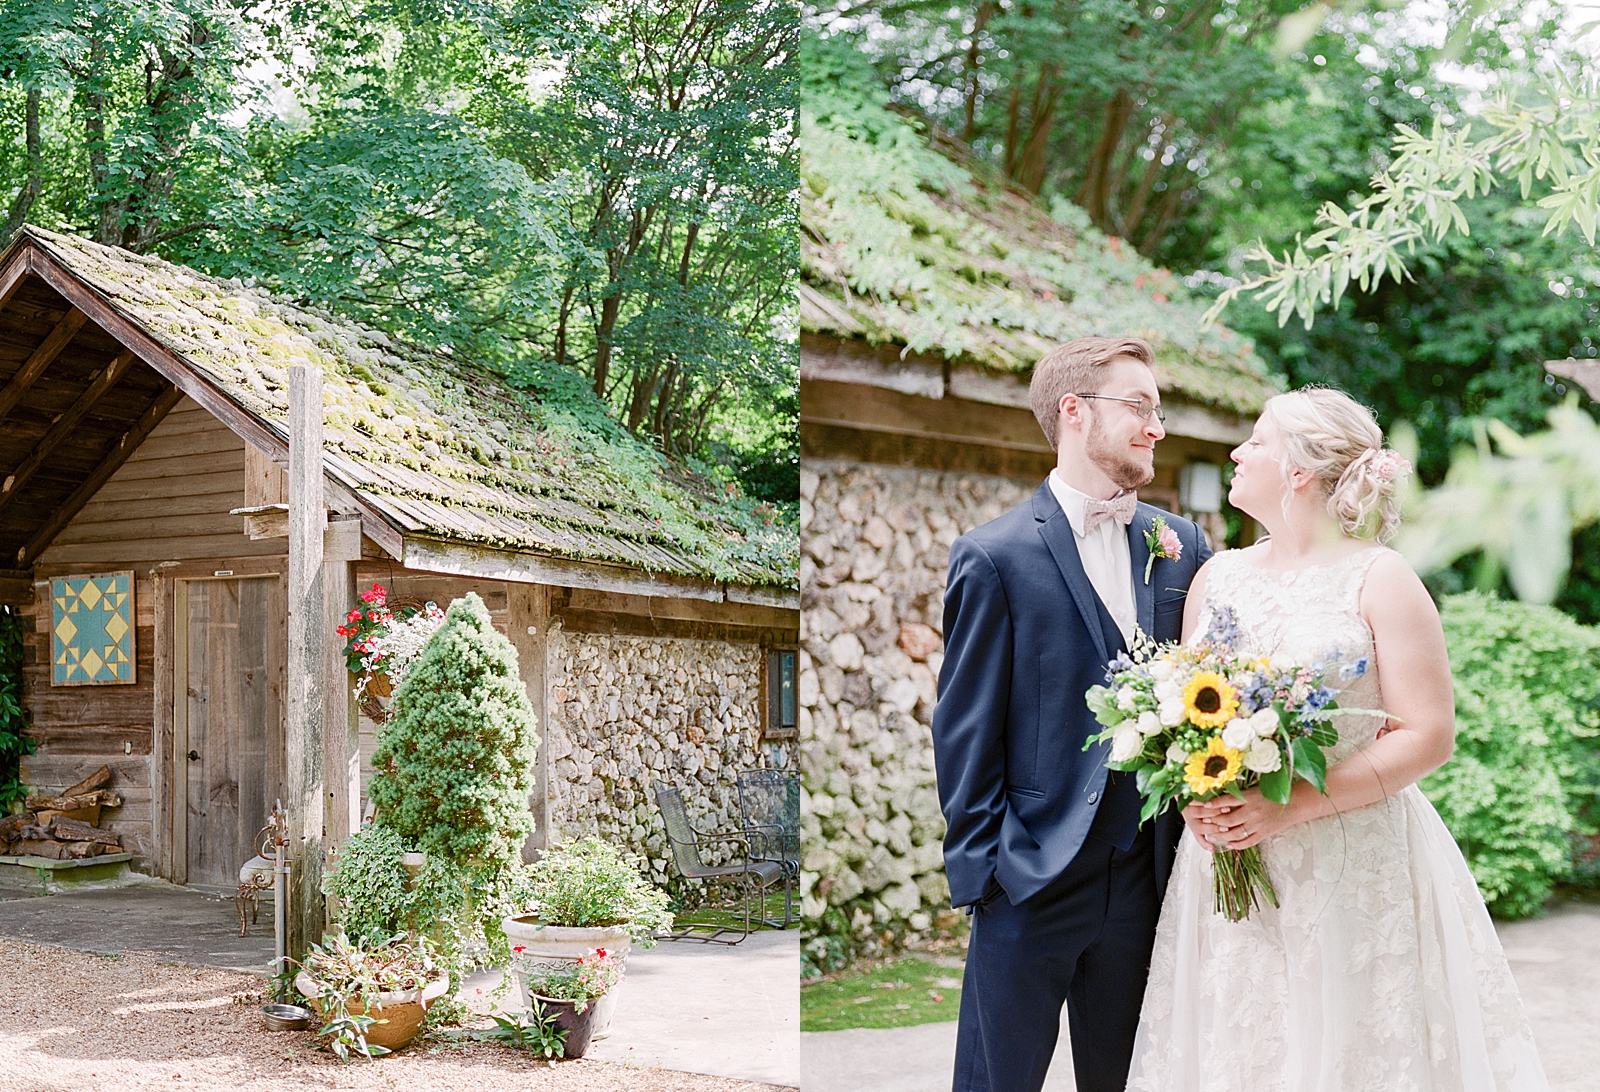 Black Fox Farms Garden Wedding Venue Old Cabin and Bride and Groom in Front of Old Cabin Photos